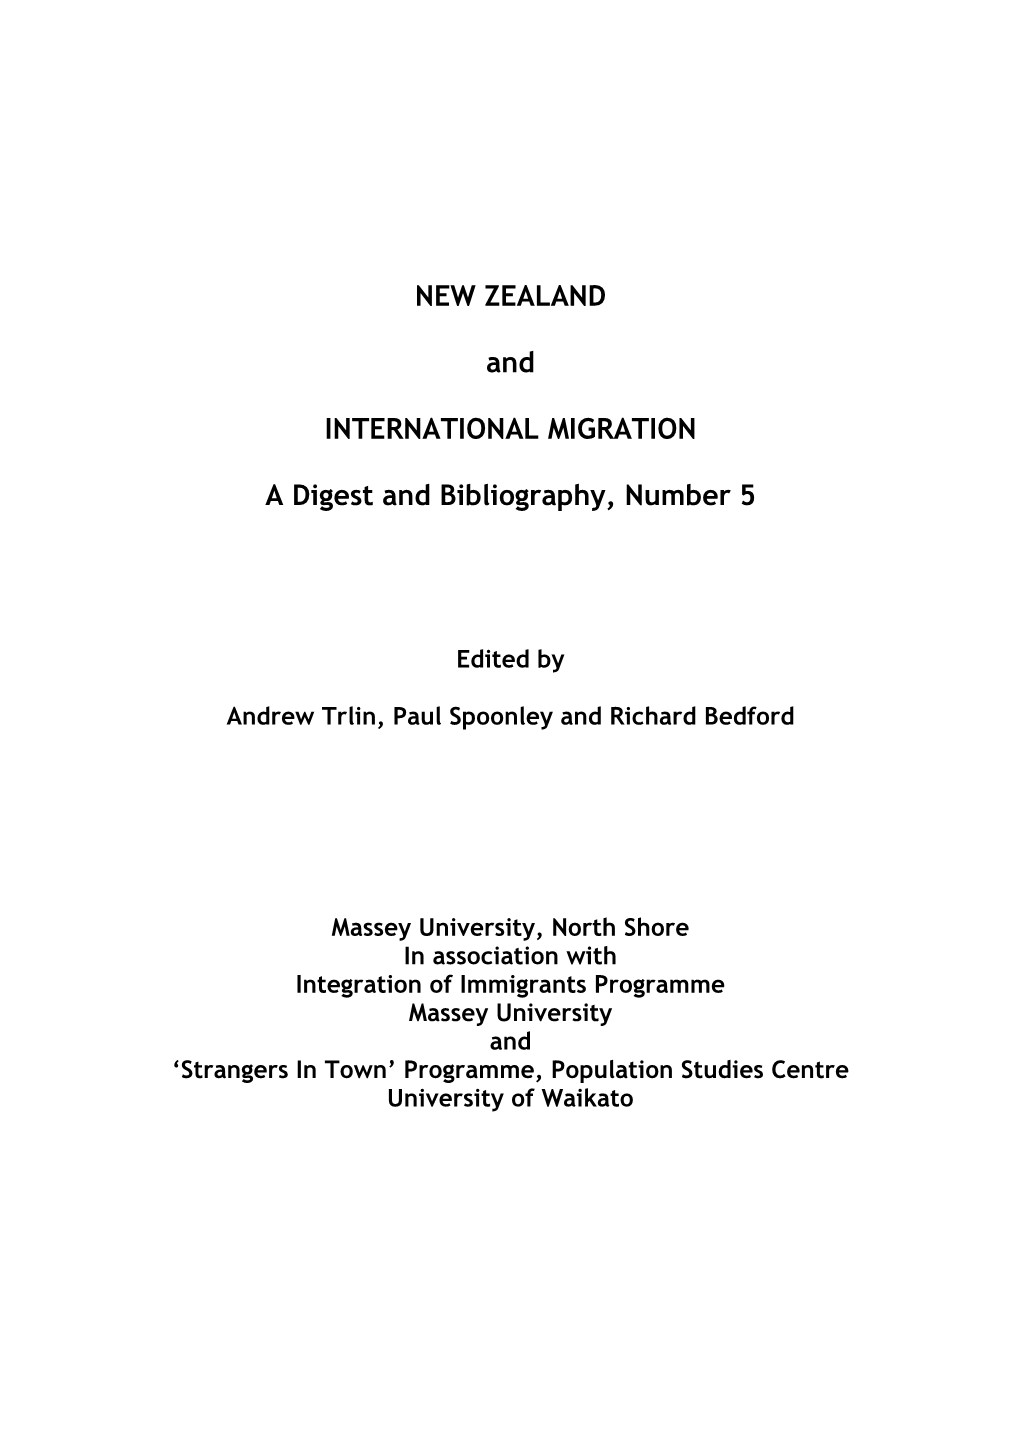 NEW ZEALAND and INTERNATIONAL MIGRATION a Digest and Bibliography, Number 5